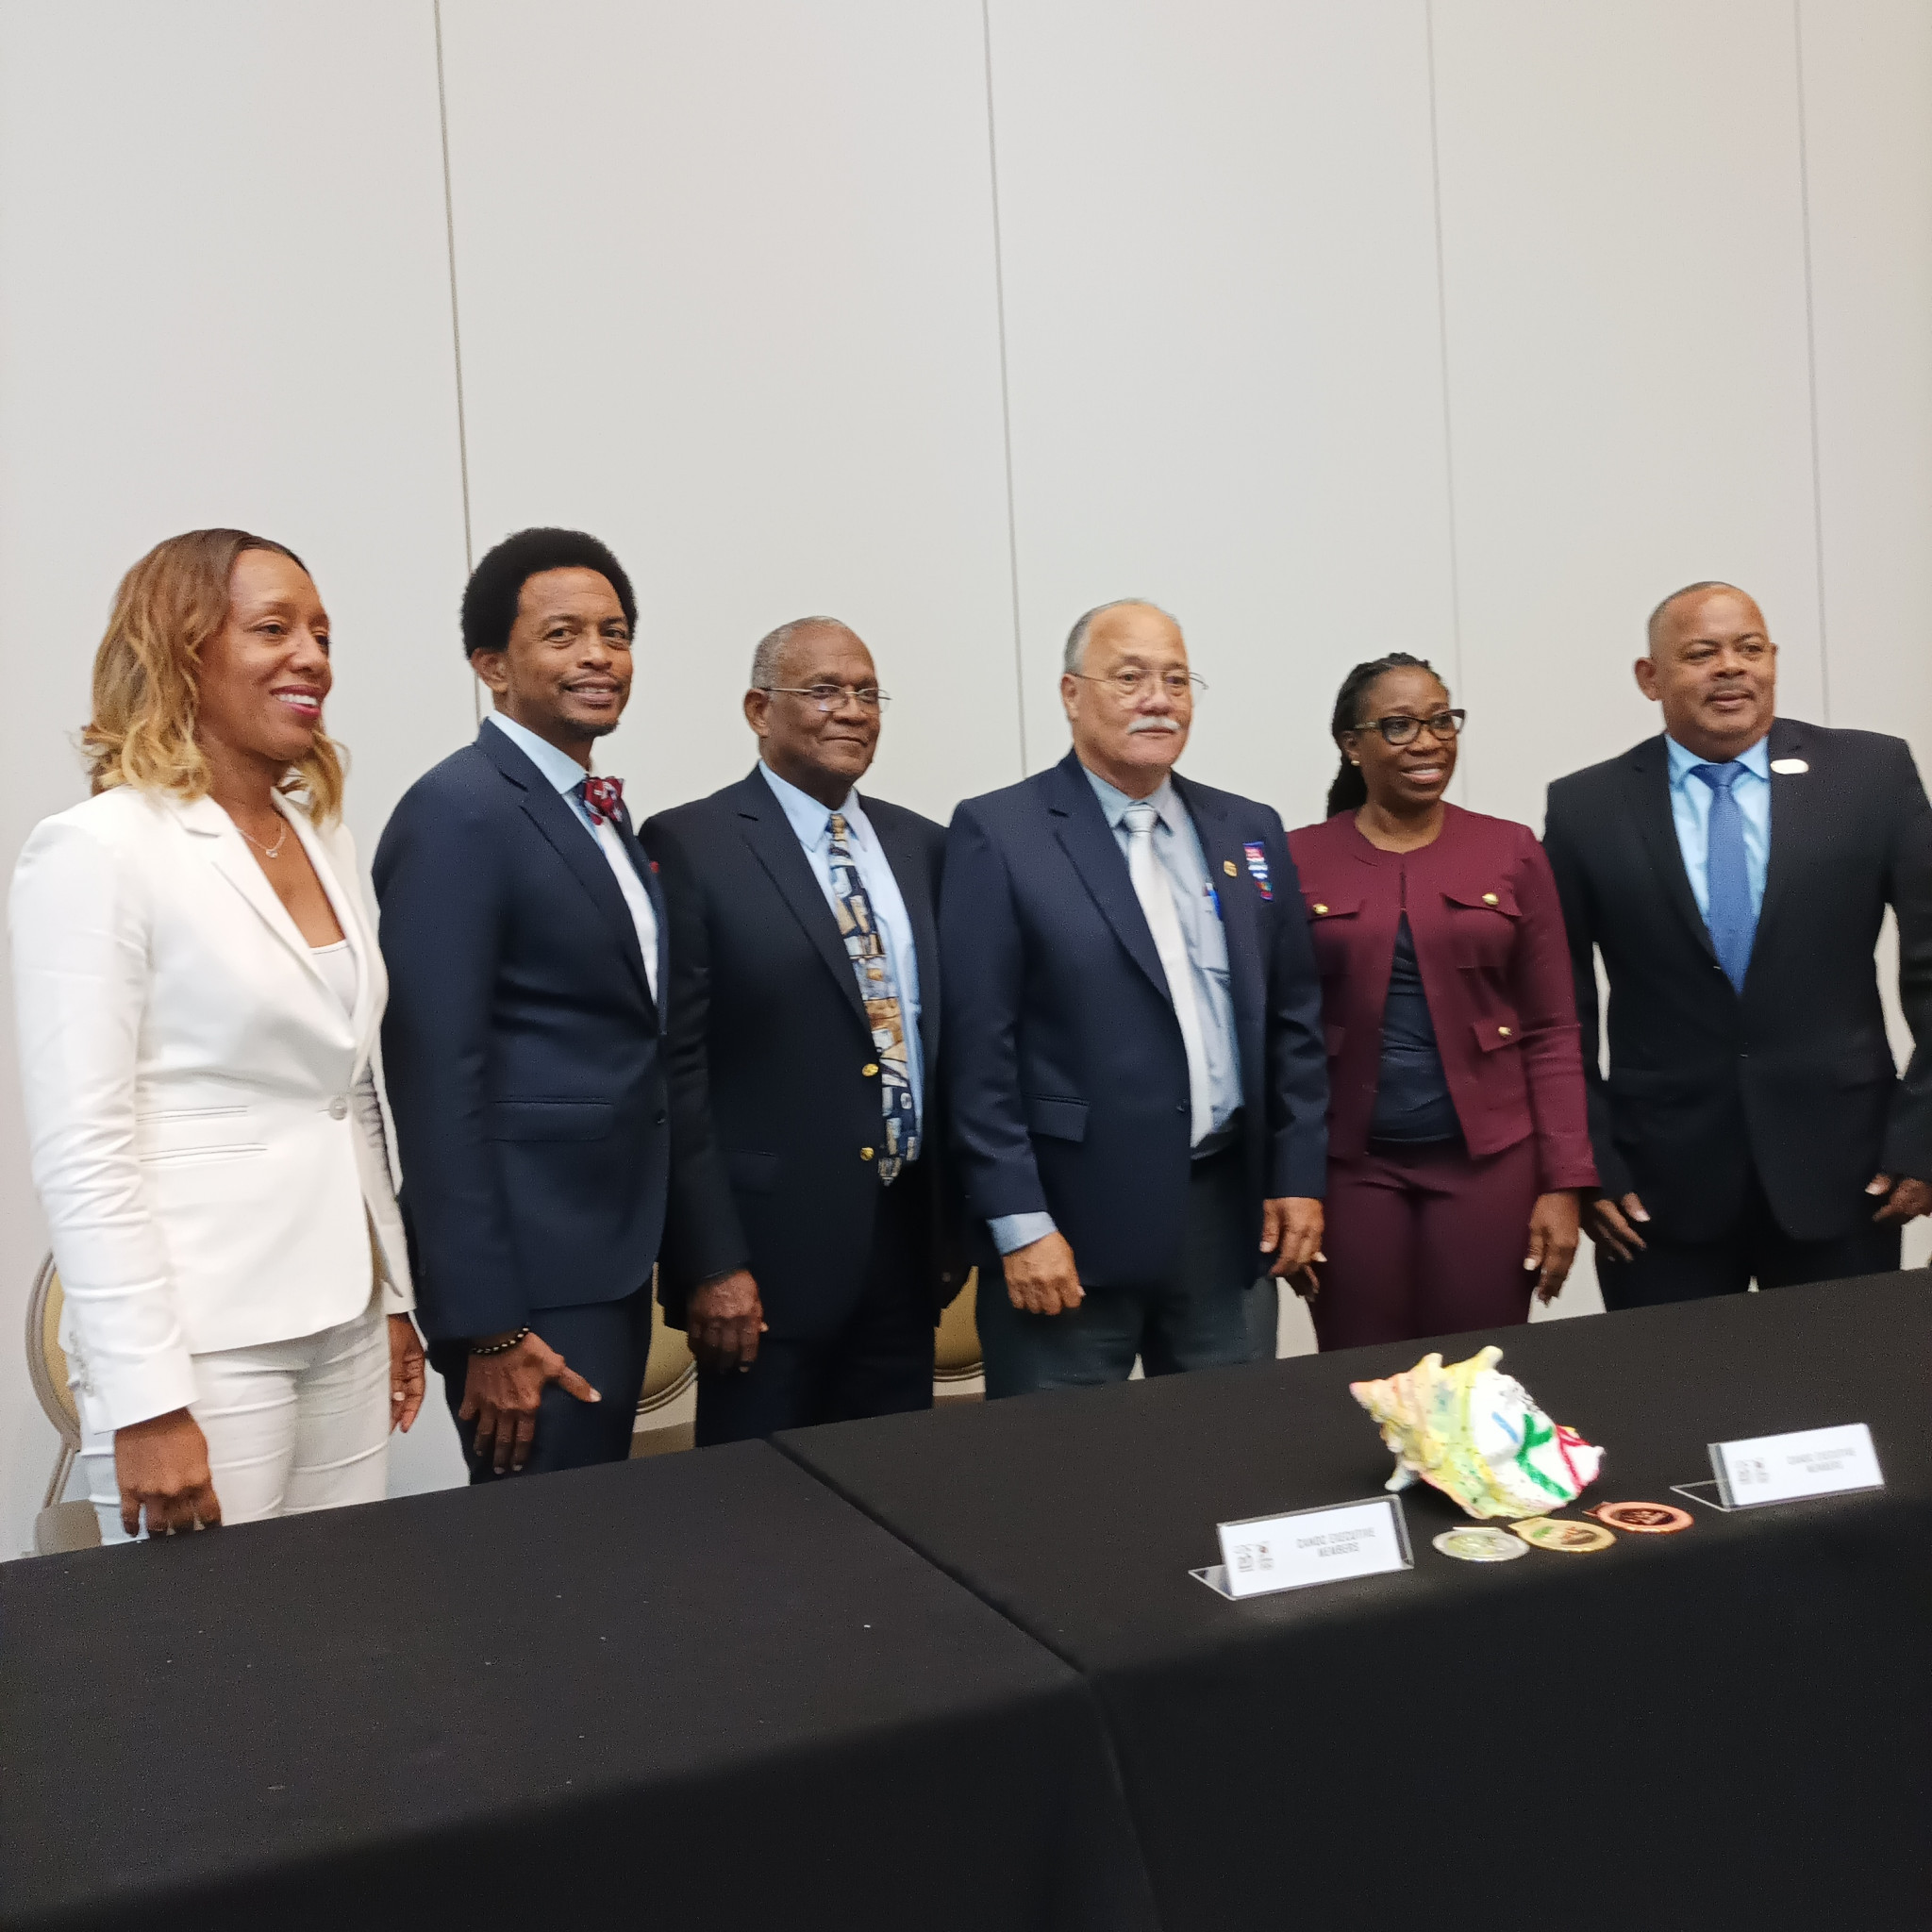 New President elected as CANOC members gather for General Assembly in Trinidad